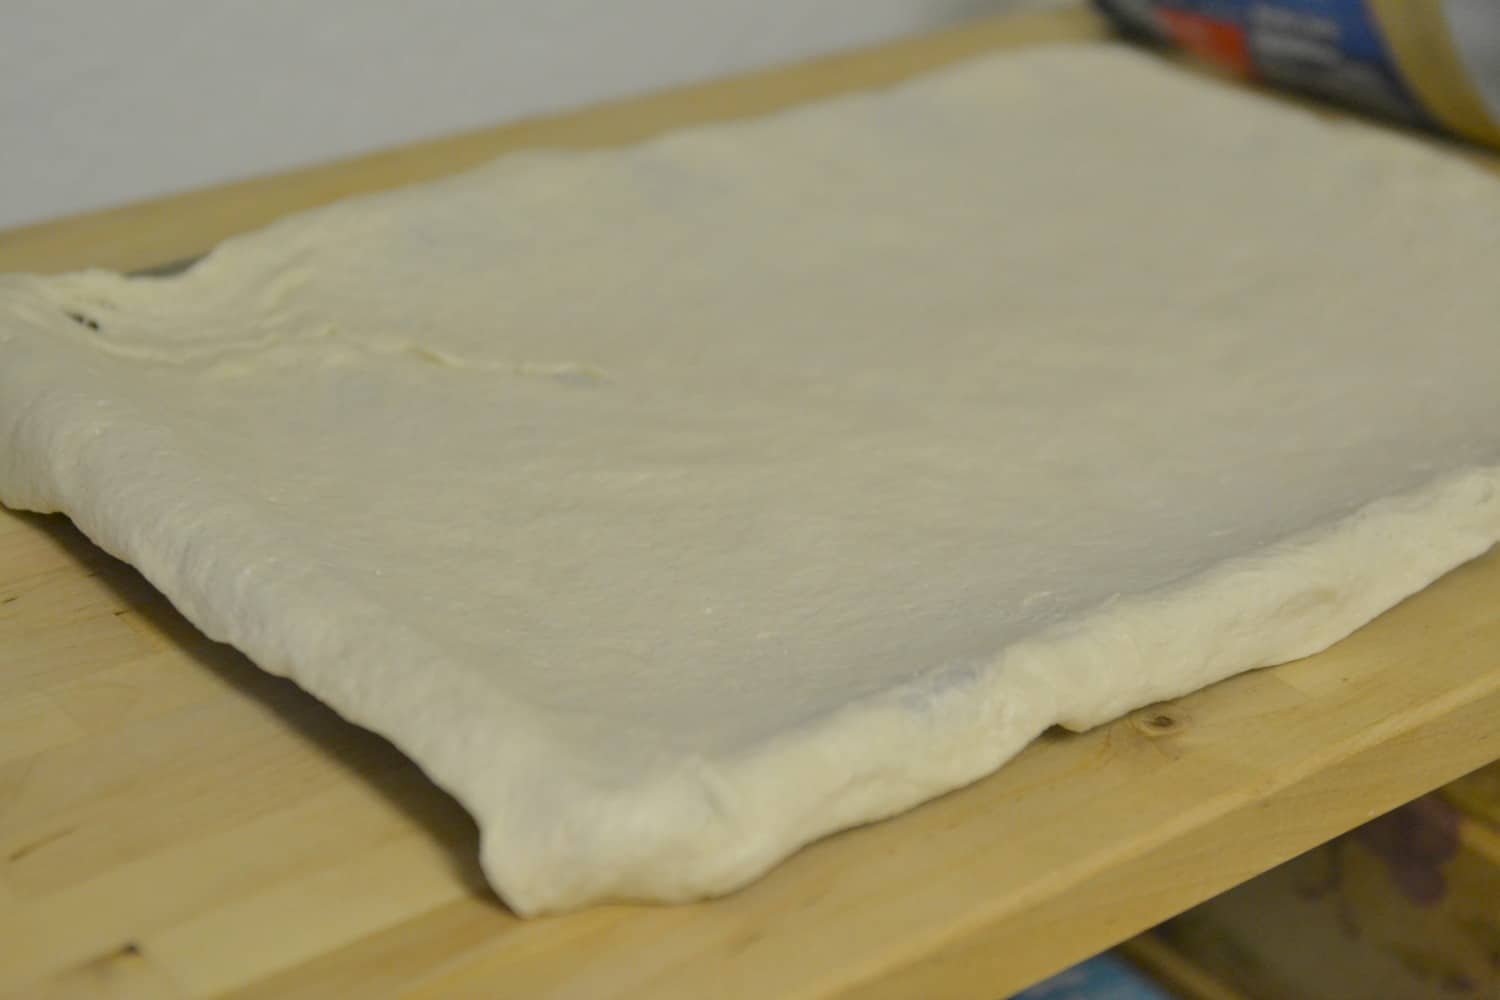 Press dough into parchment-lined cookie sheet, with excess hanging over edge of pan.